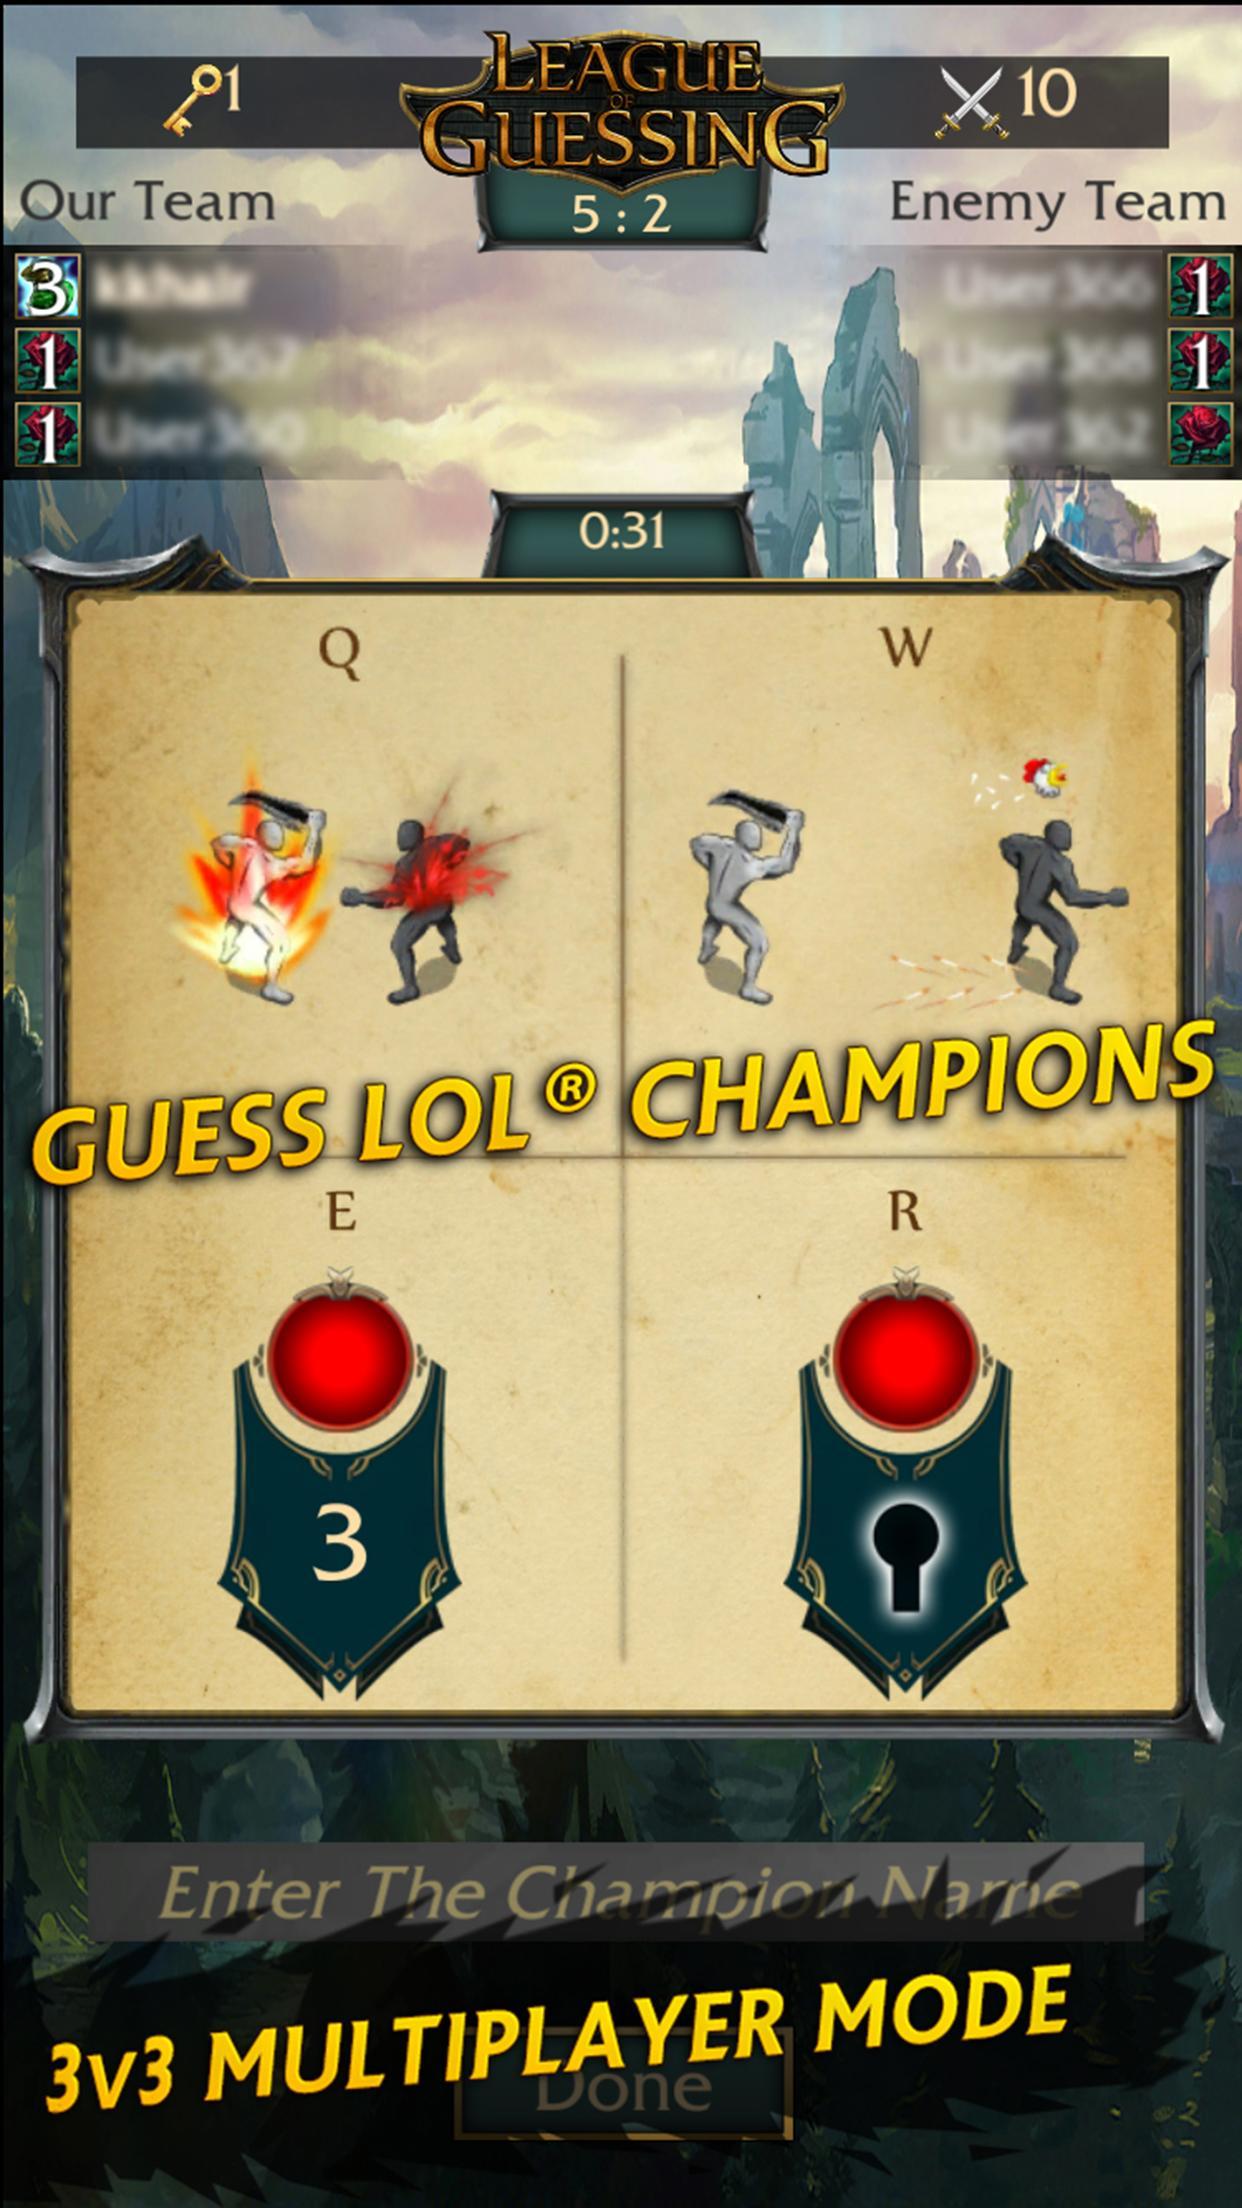 League Of Guessing for Android - APK Download